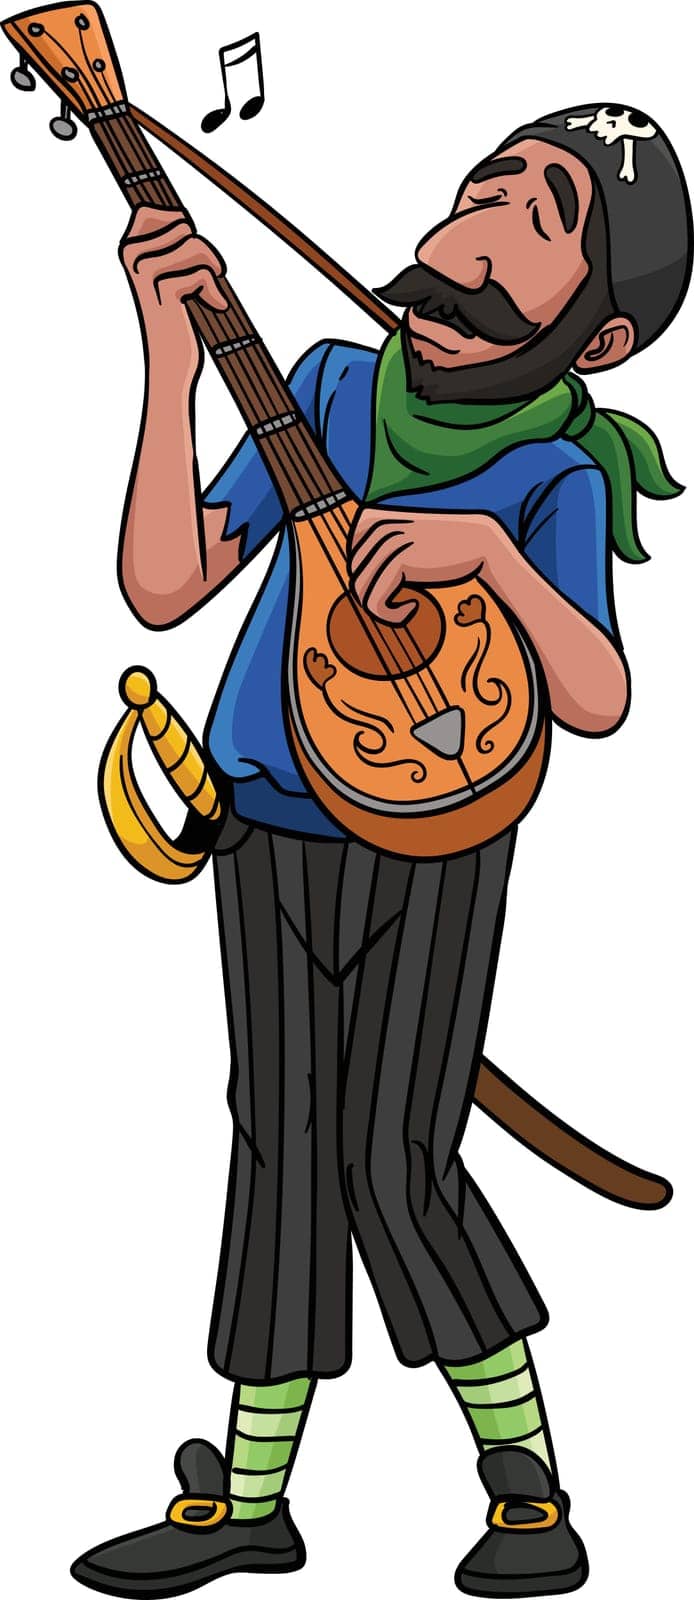 Pirate with Guitar Cartoon Colored Clipart by abbydesign